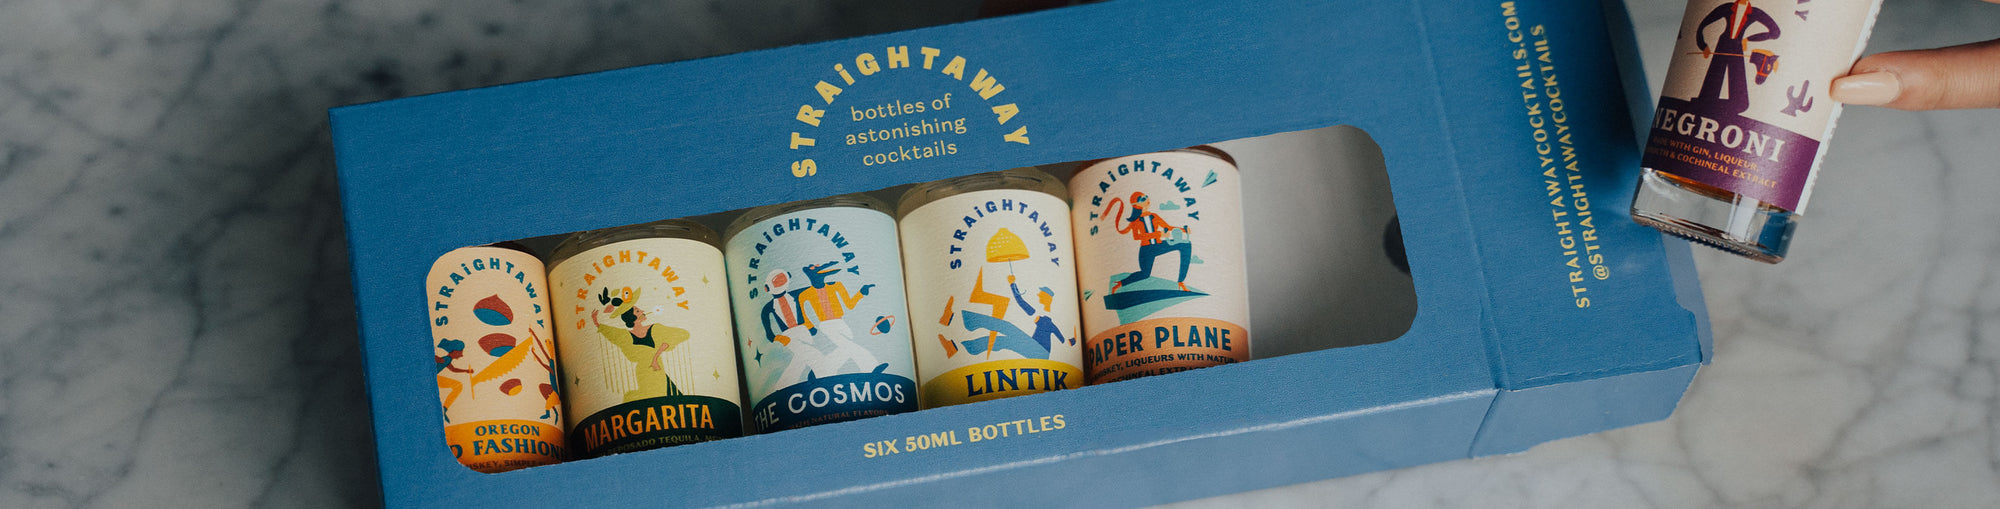 Ready-to-drink cocktail gift packs